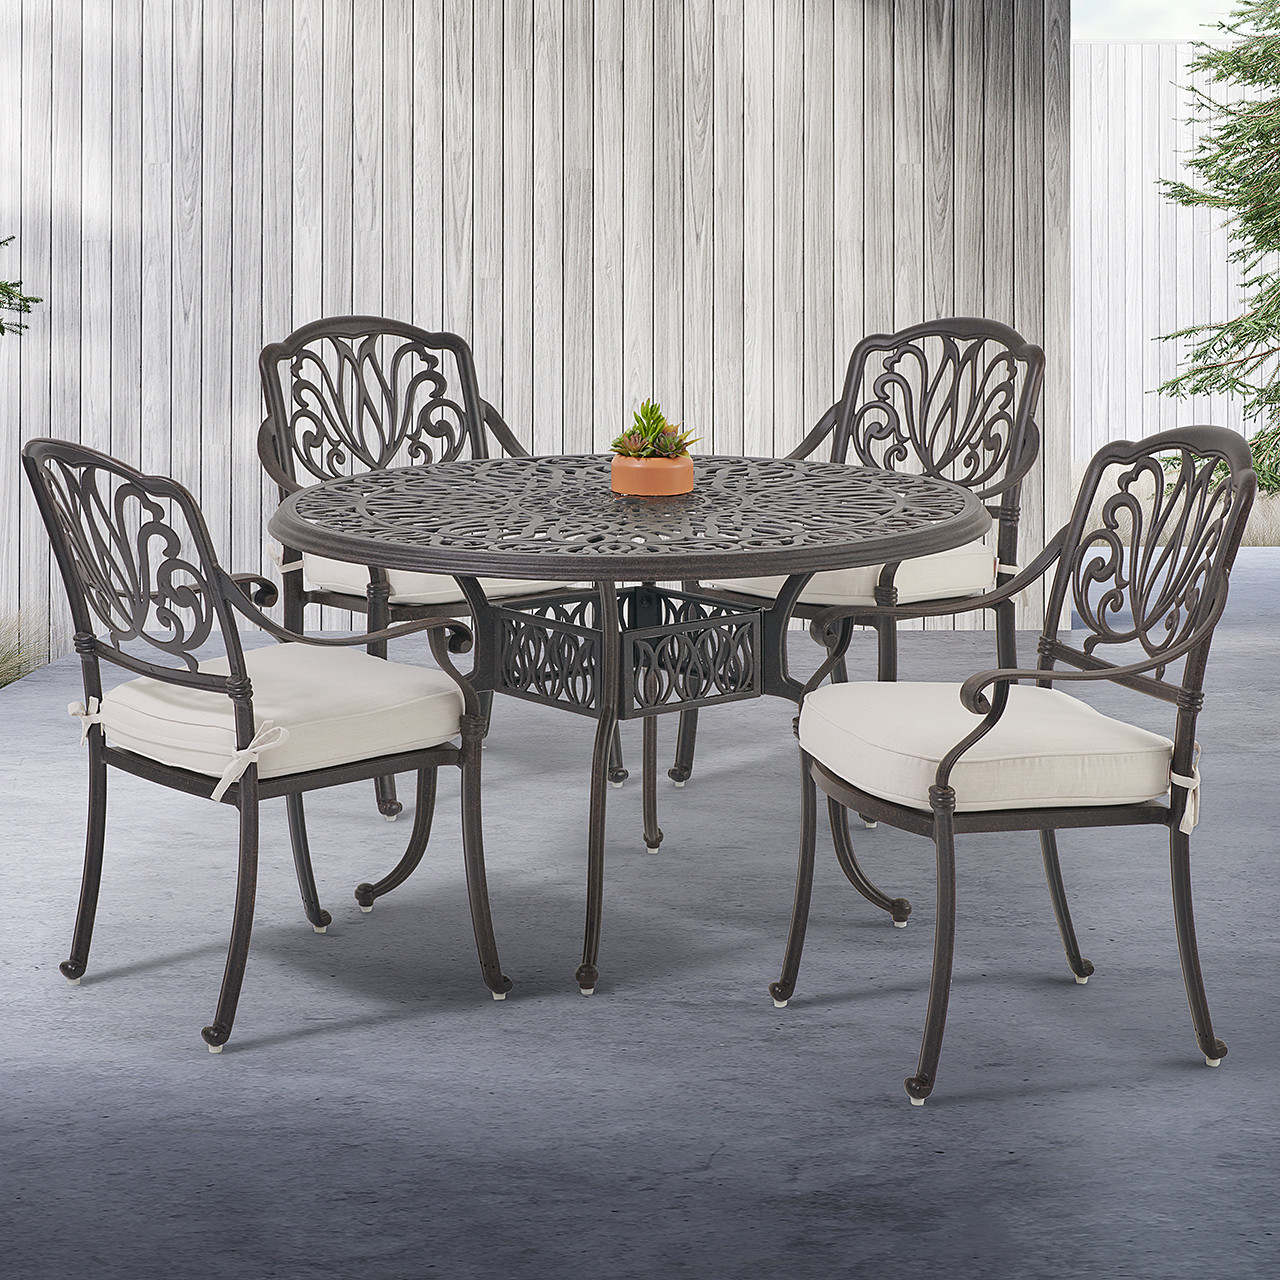 Cadiz Cast Aluminum with Cushions 5 Pc. Dining Set + 48 in. D Table